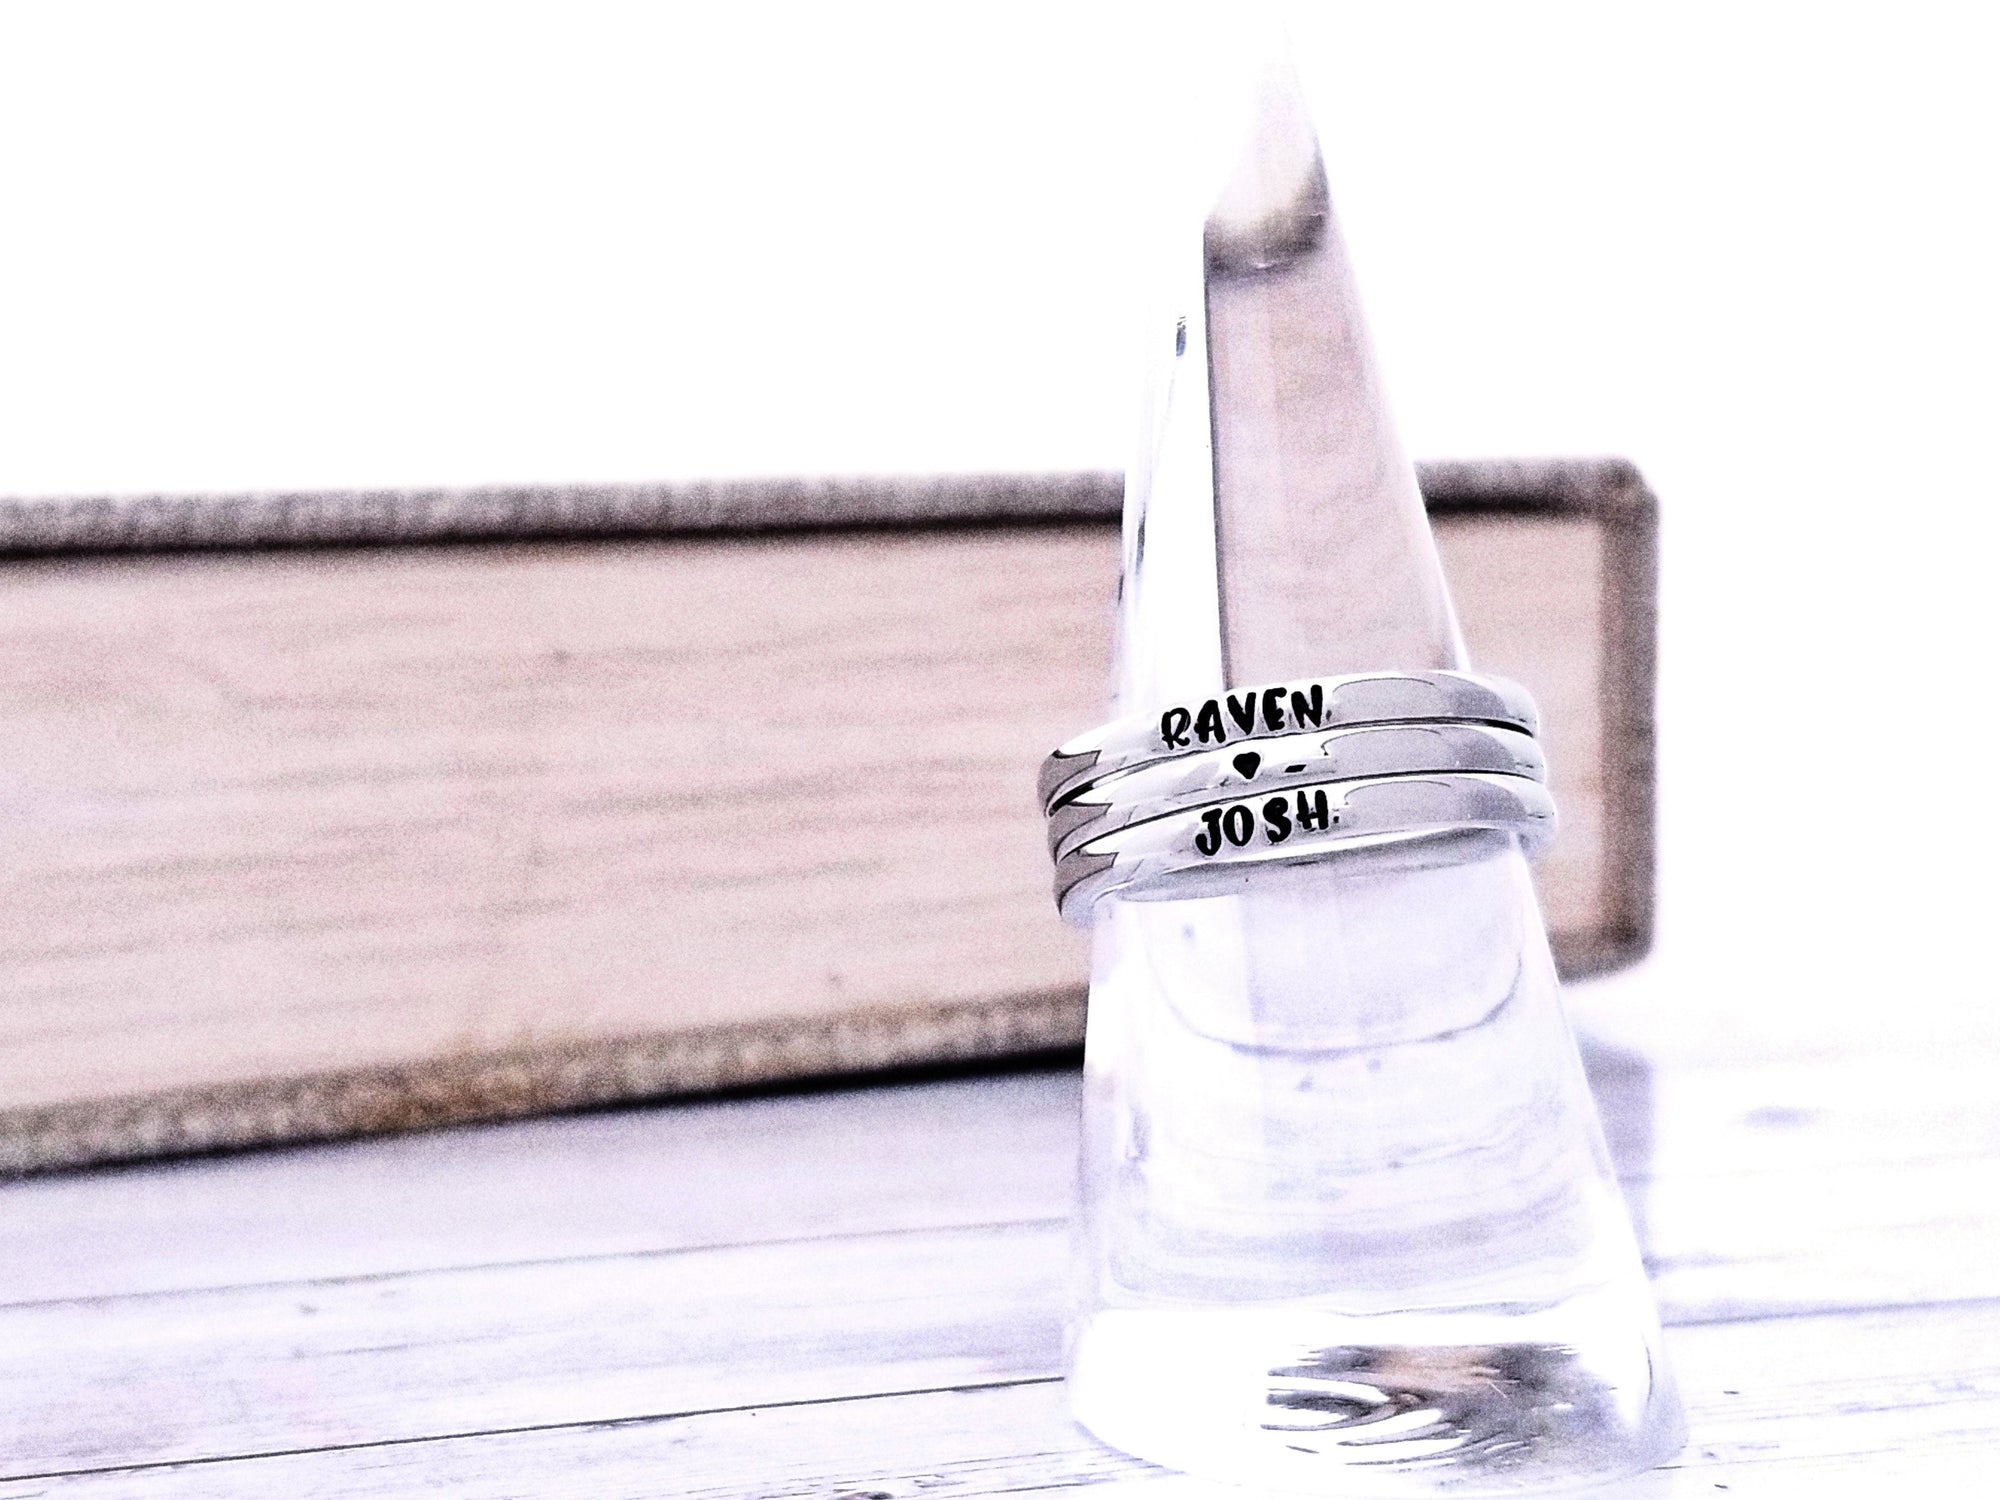 Tiny Stacking Rings, Custom Hand Stamped Rings, Personalized Gift, Eternity rings, Stainless Steel (Copy)